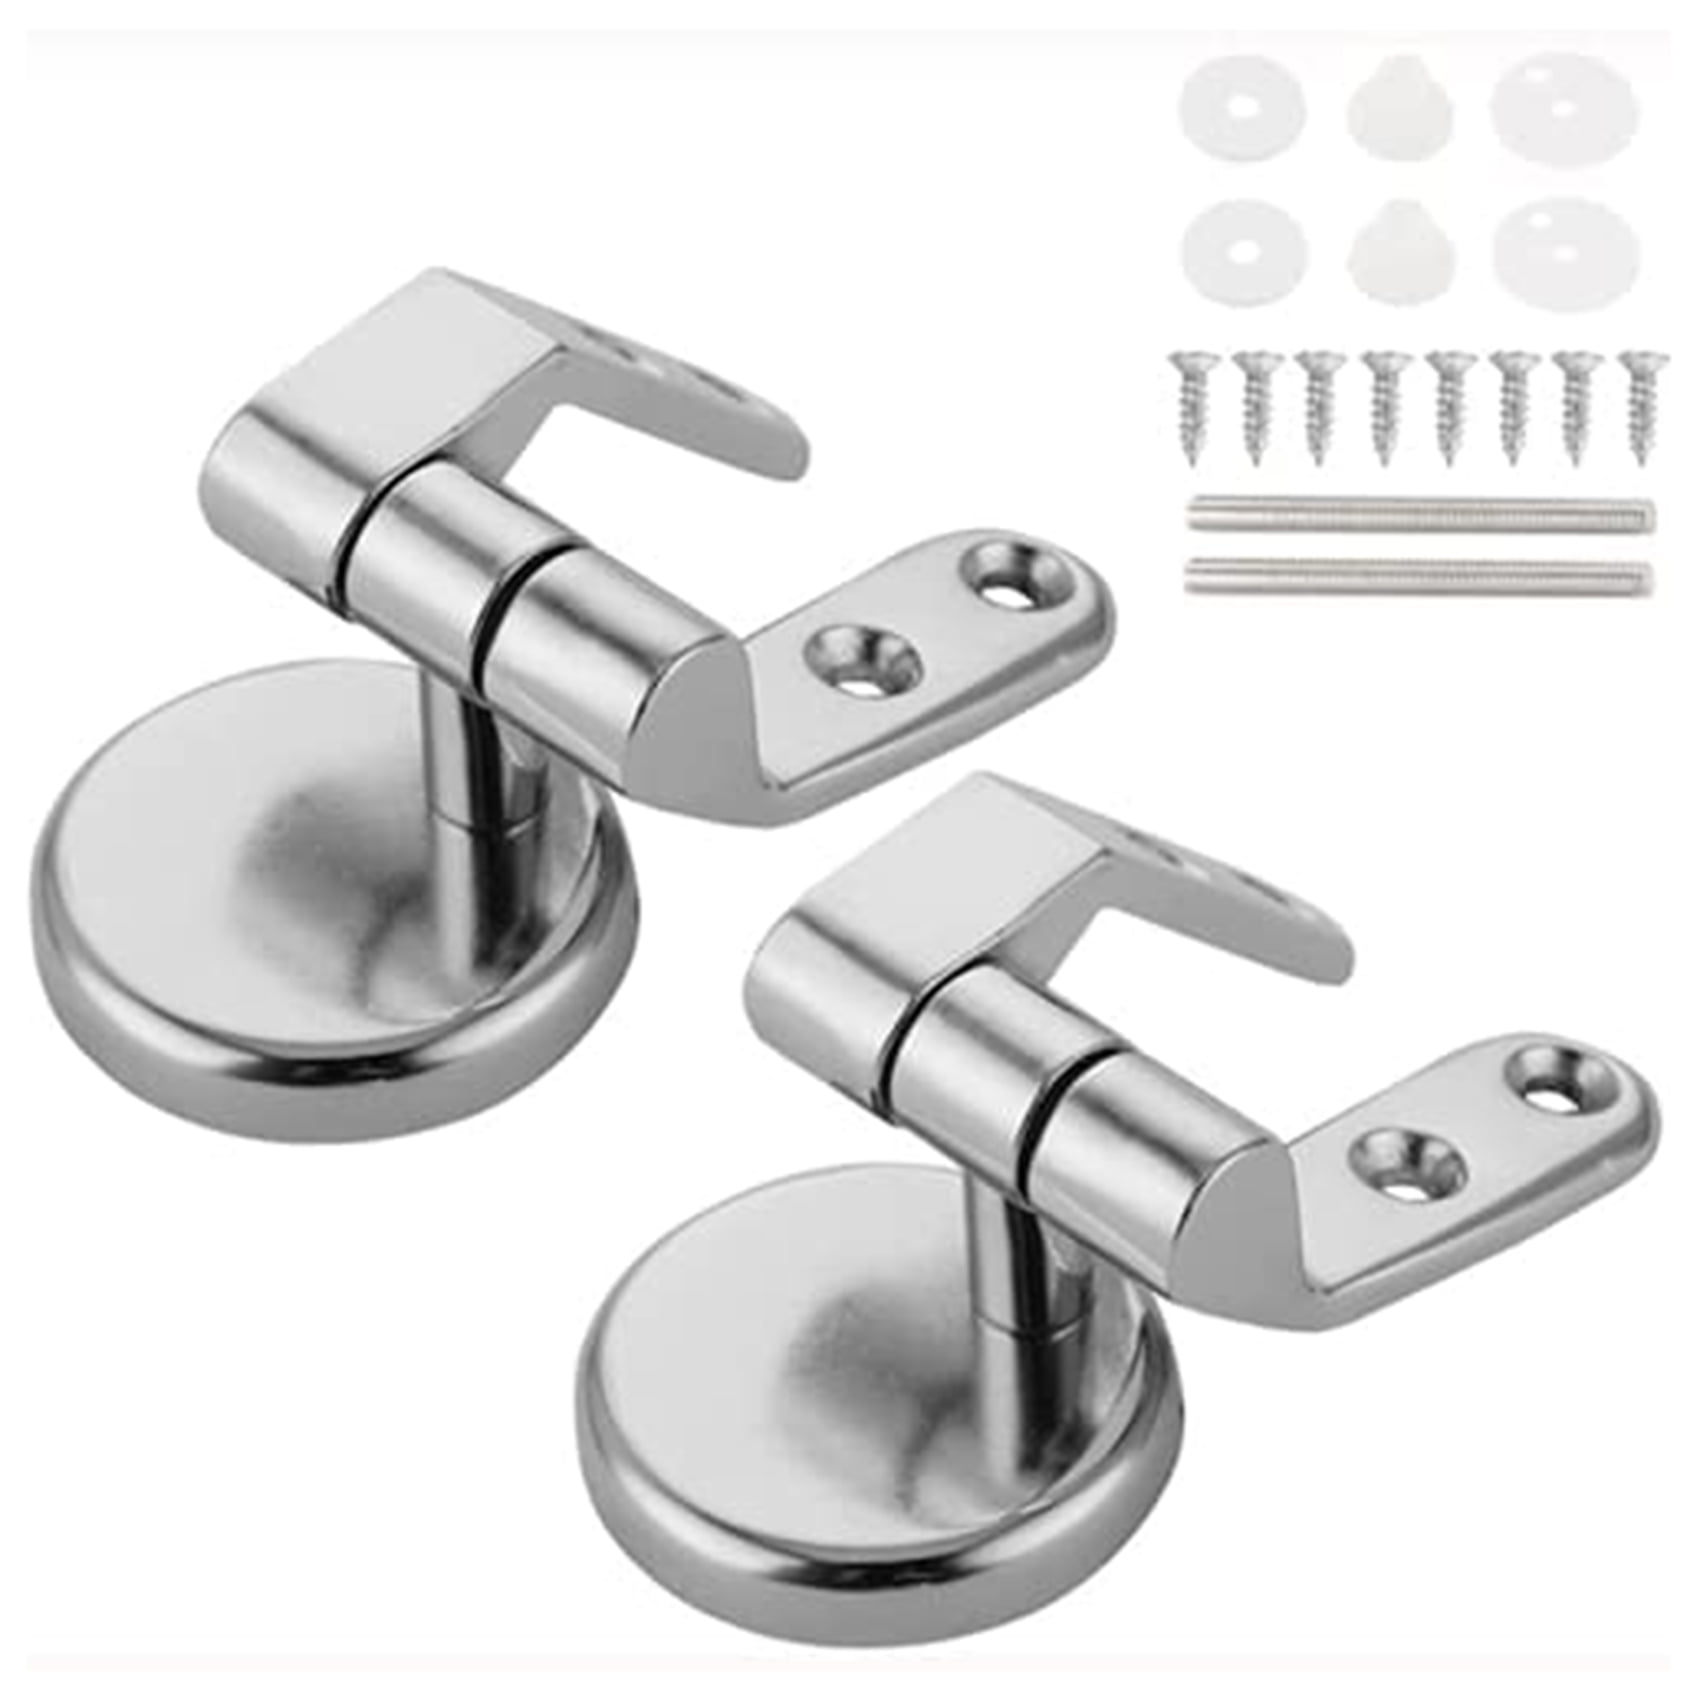 Toilet Seat Hinges Fittings,1 Pair of Zinc Alloy Replacement Toilet Seat Fittings and Fixtures with Screws Nuts for Toilet Seats WC Cover 